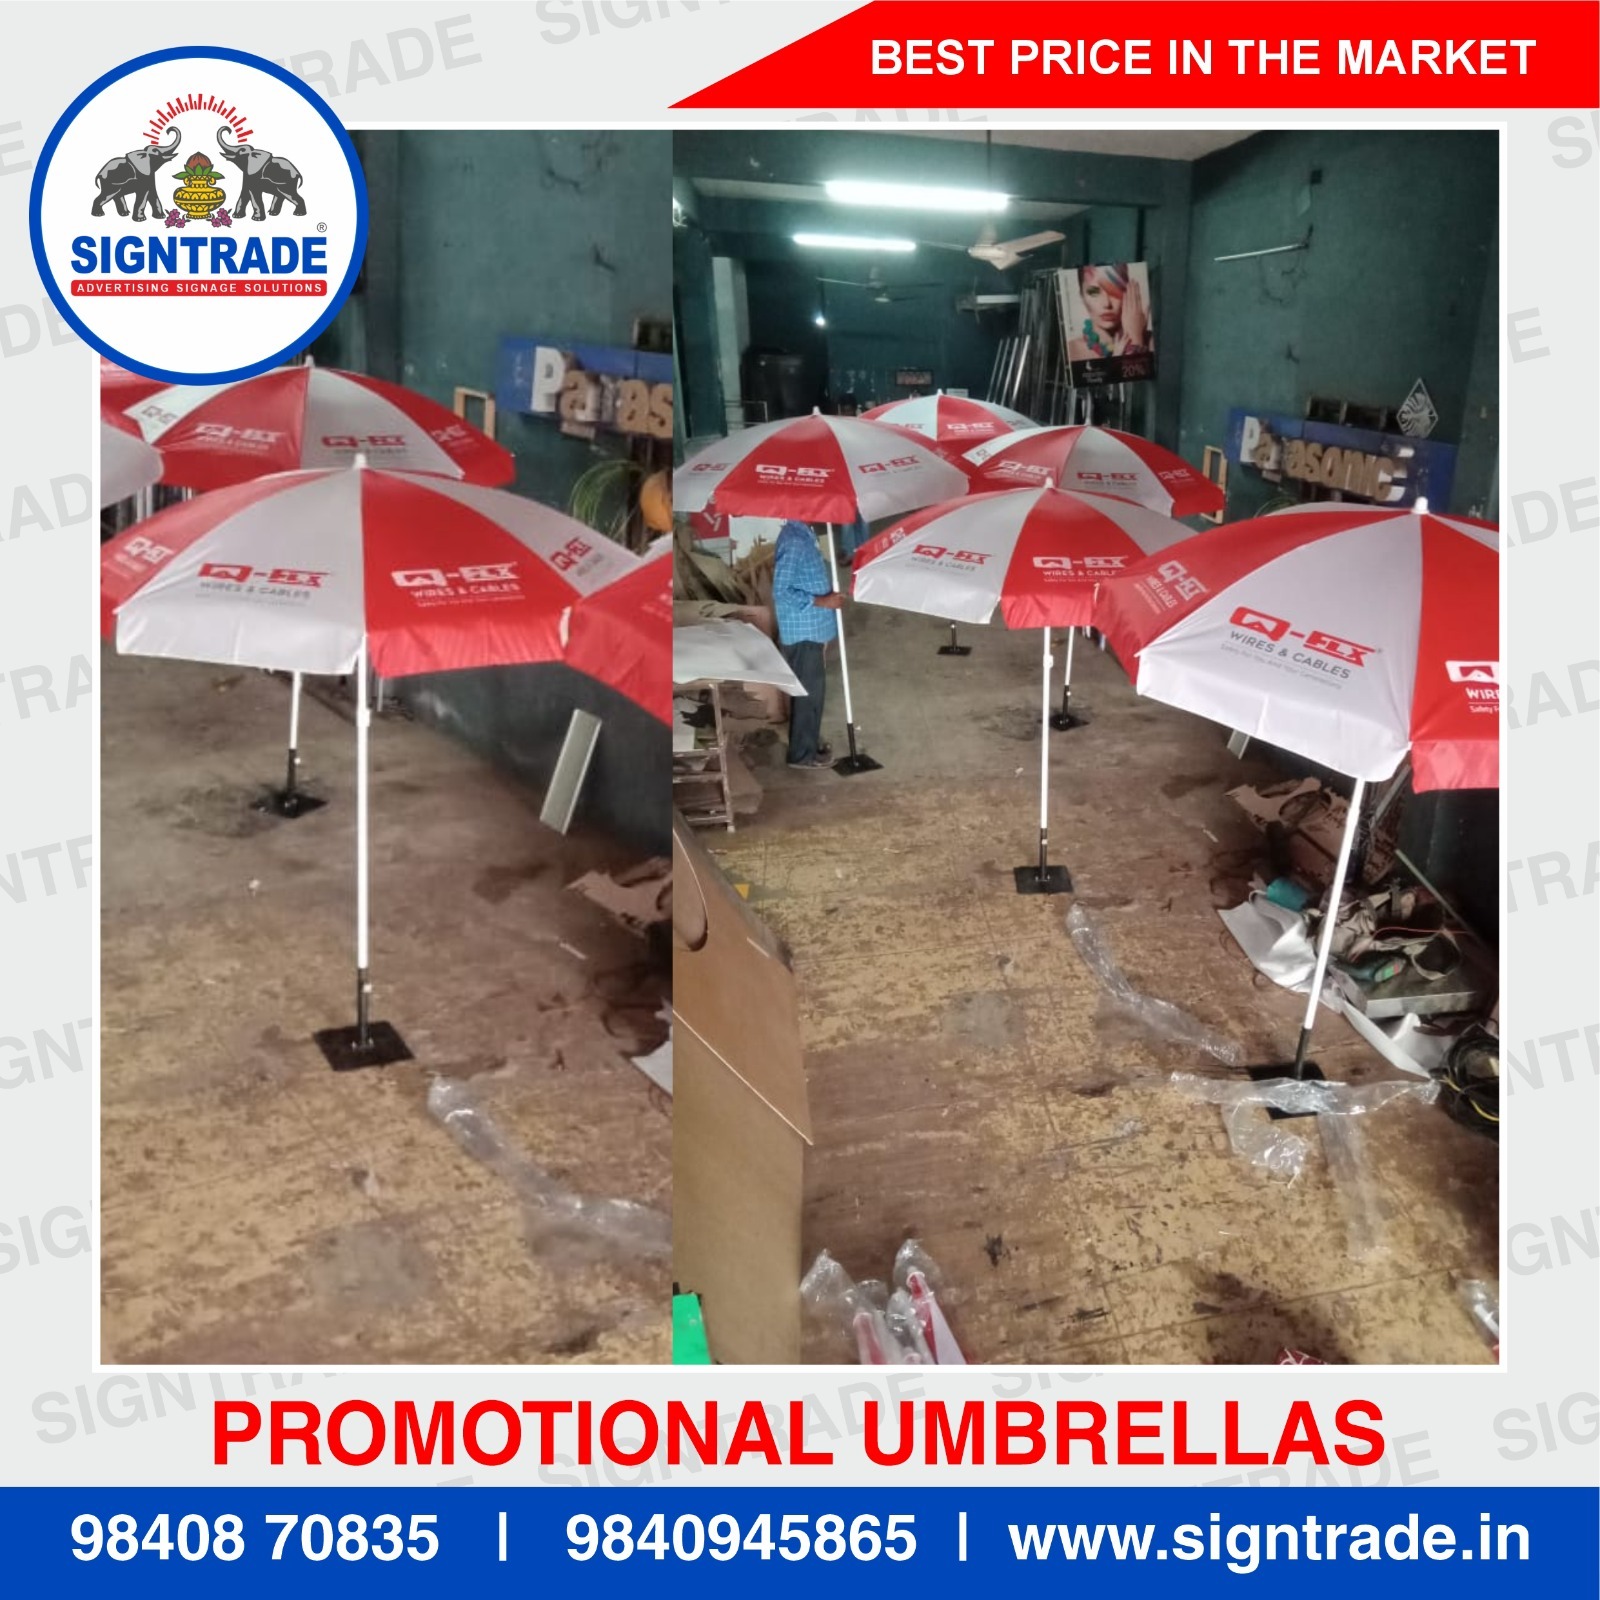 Promotional Umbrella Manufacturers near me in Guindy